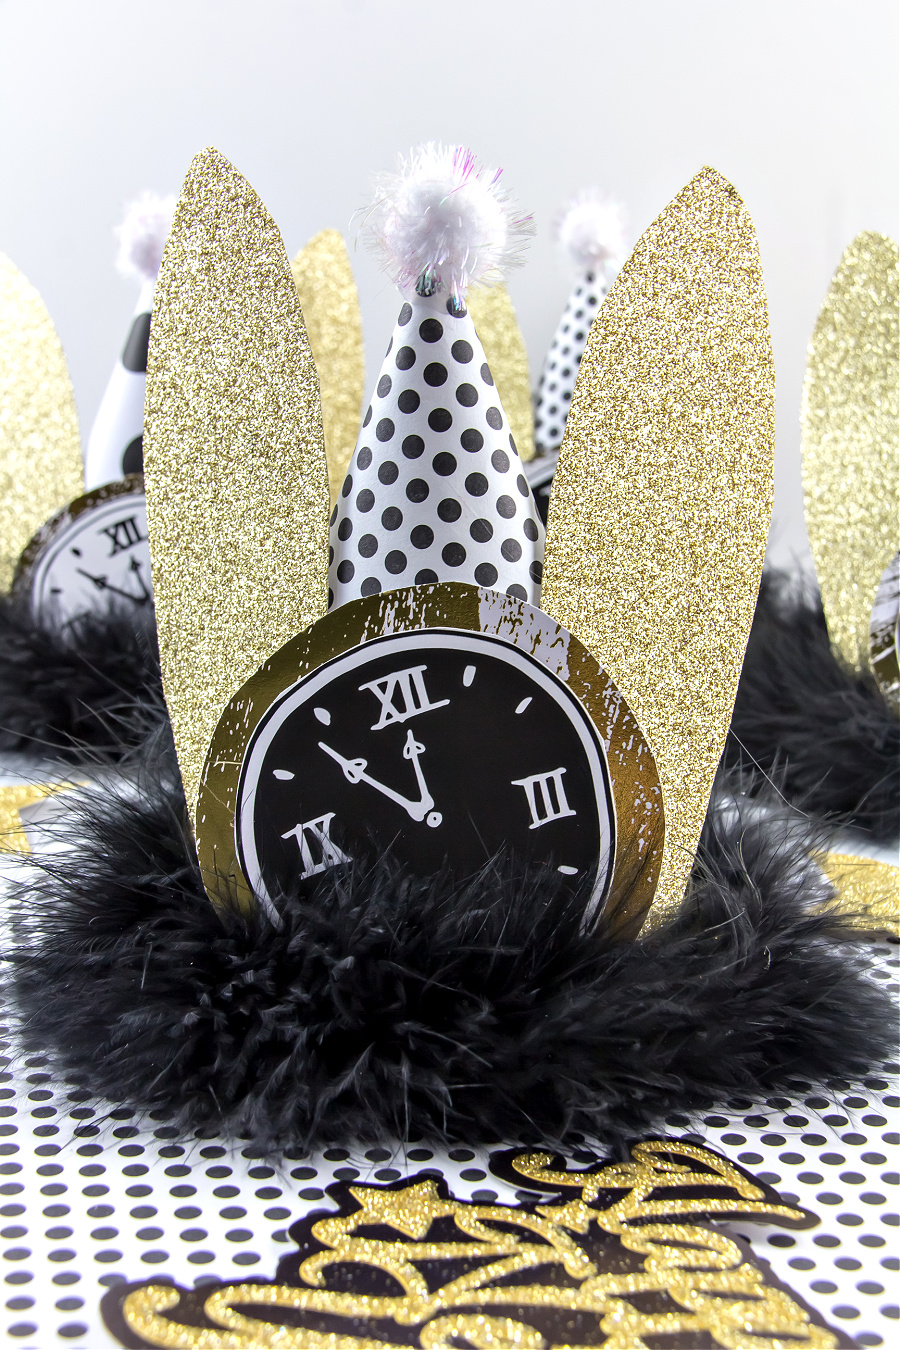 DIY new year hats inspired by the white rabbit in alice in wonderland